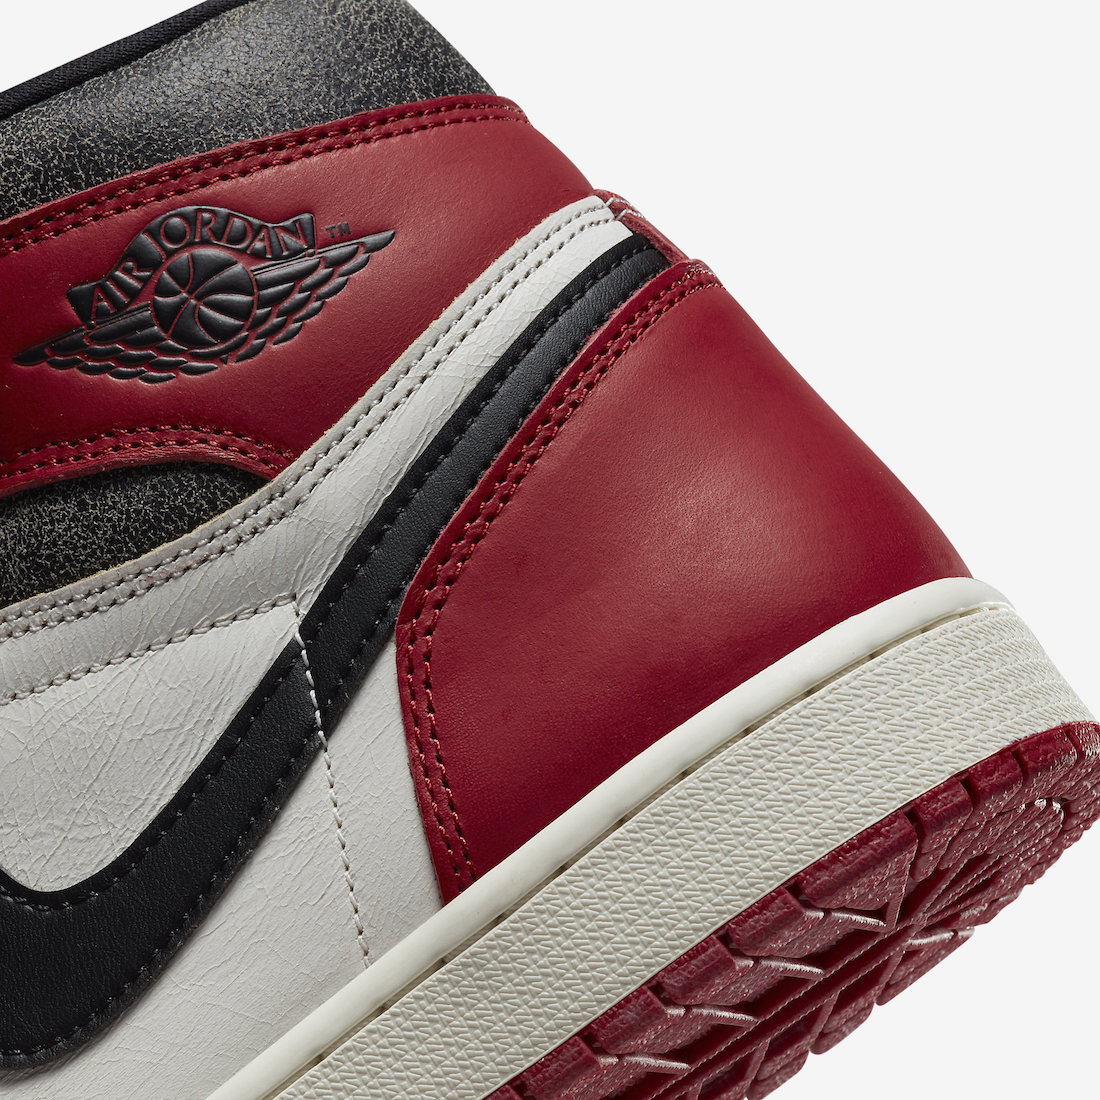 Air Jordan 1 Chicago Lost and Found DZ5485-612 Release Date